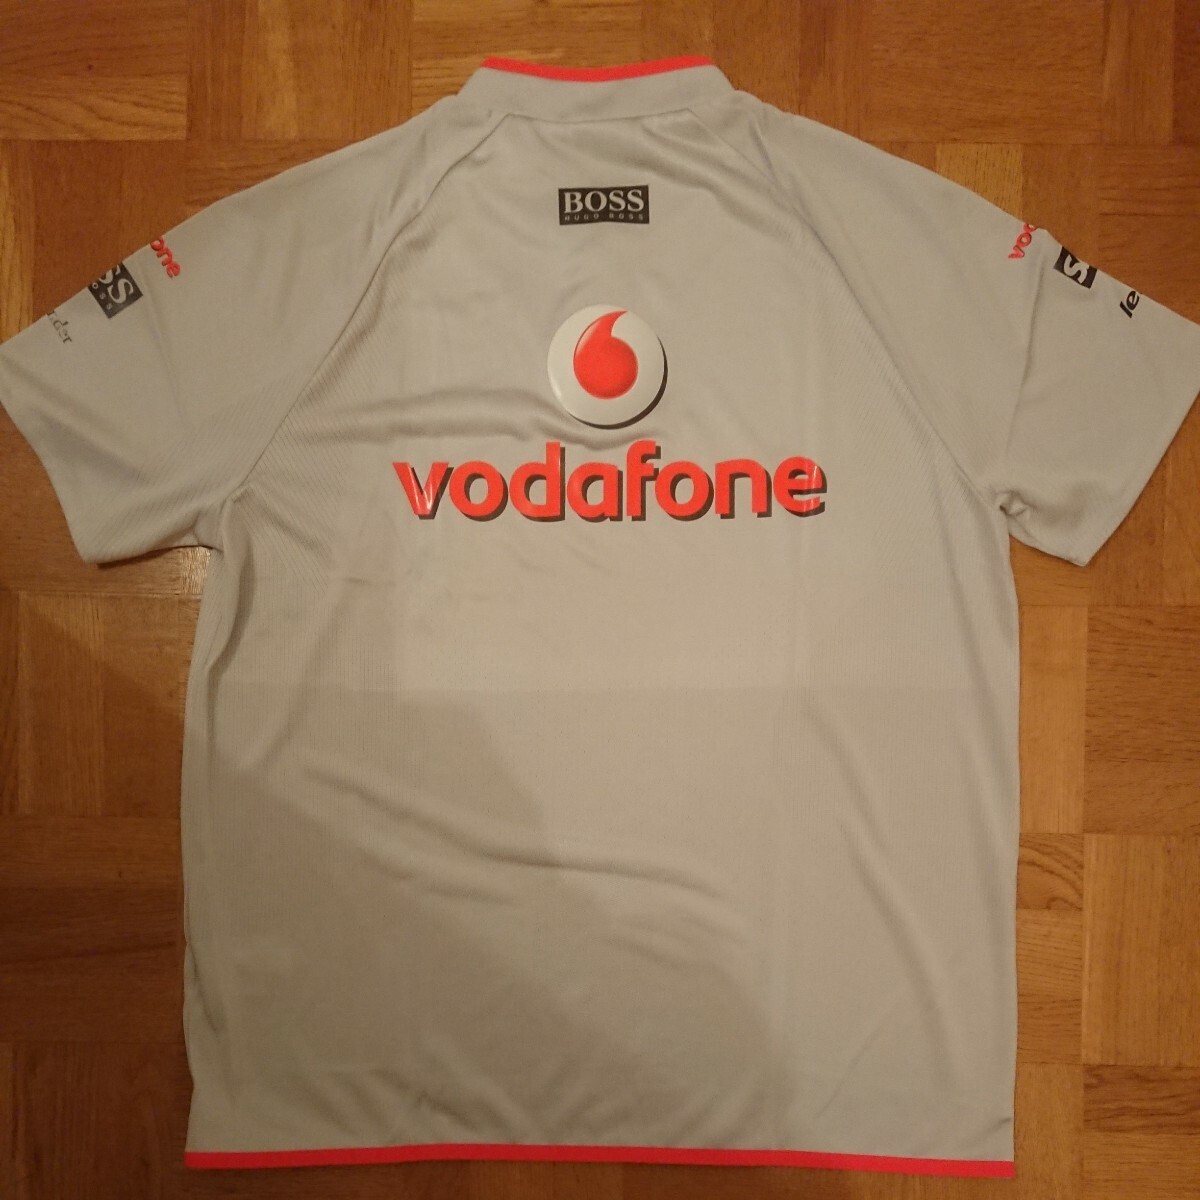  not for sale new goods unused tag attaching 2009 Vodafone McLAREN Mercedes F1 team supplied goods half Zip polo-shirt XL size HUGO BOSS